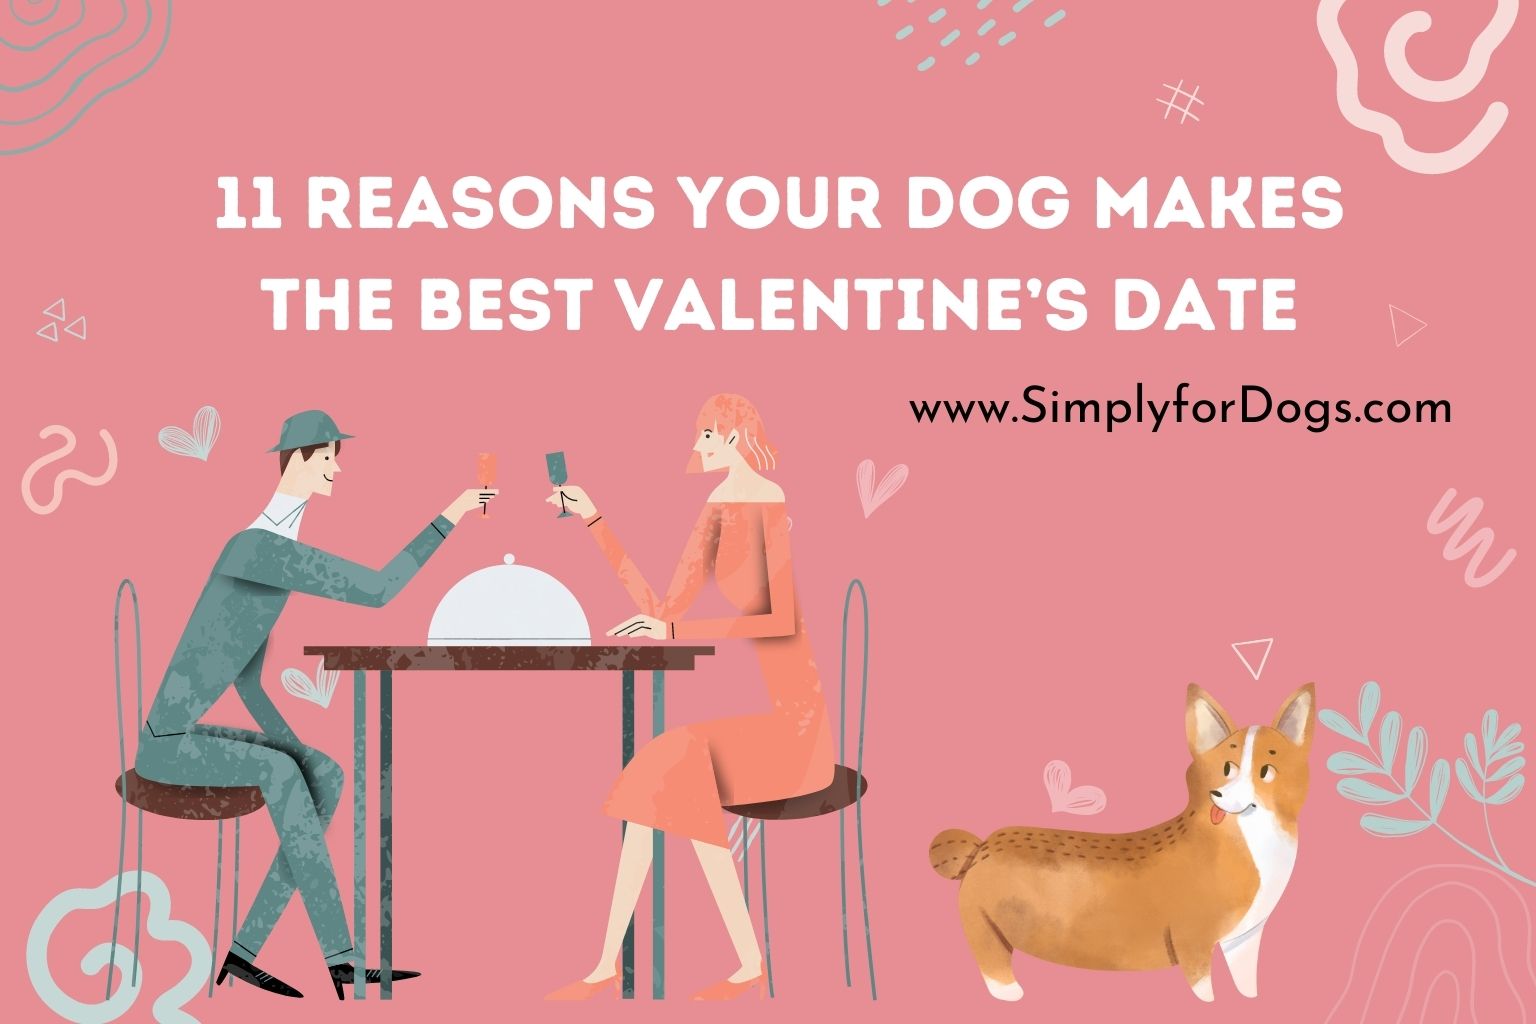 11 Reasons Your Dog Makes the Best Valentine’s Date